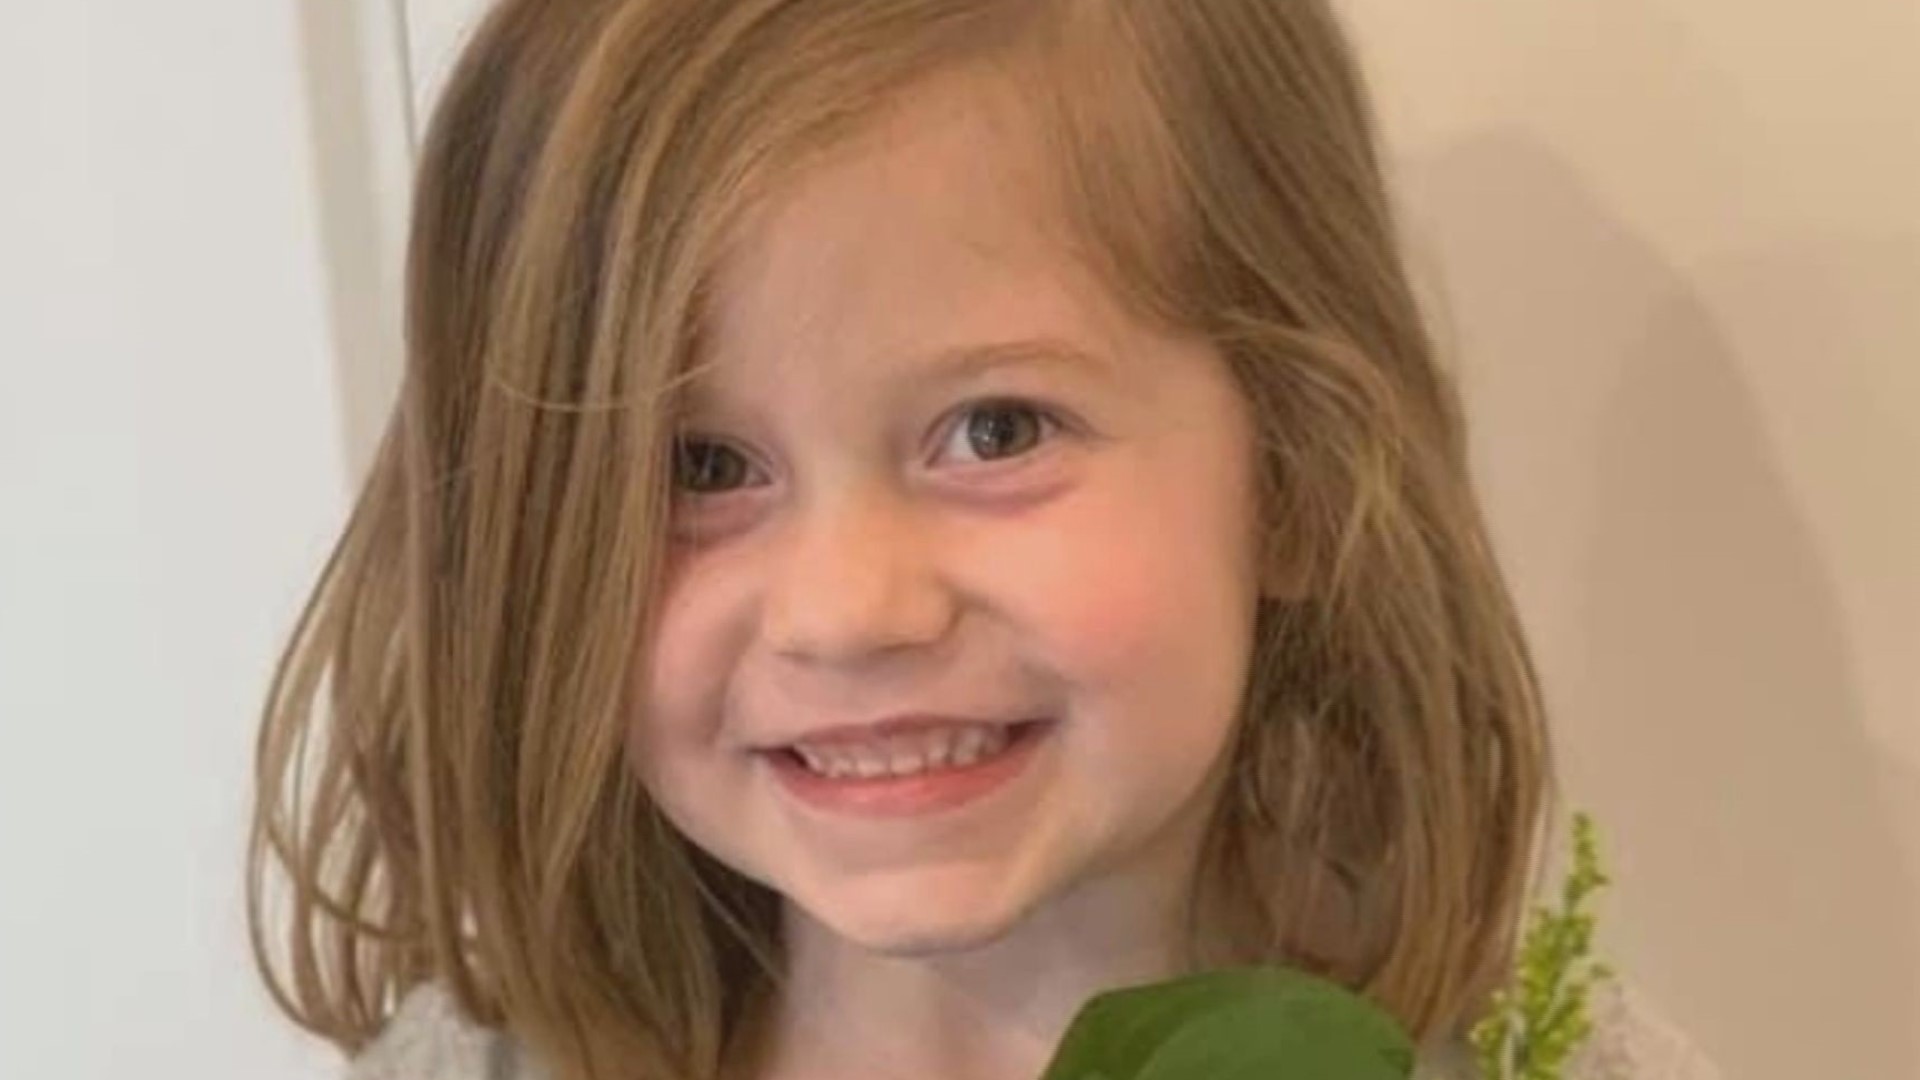 Six year old Aria Hill was with her father at a Utah golf course, Monday, when officials say his golf ball hit her in the head. The little girl was waiting in a golf cart about twenty yards from where her father was teeing off, when the ball veered off course and struck her at the base of the skull.